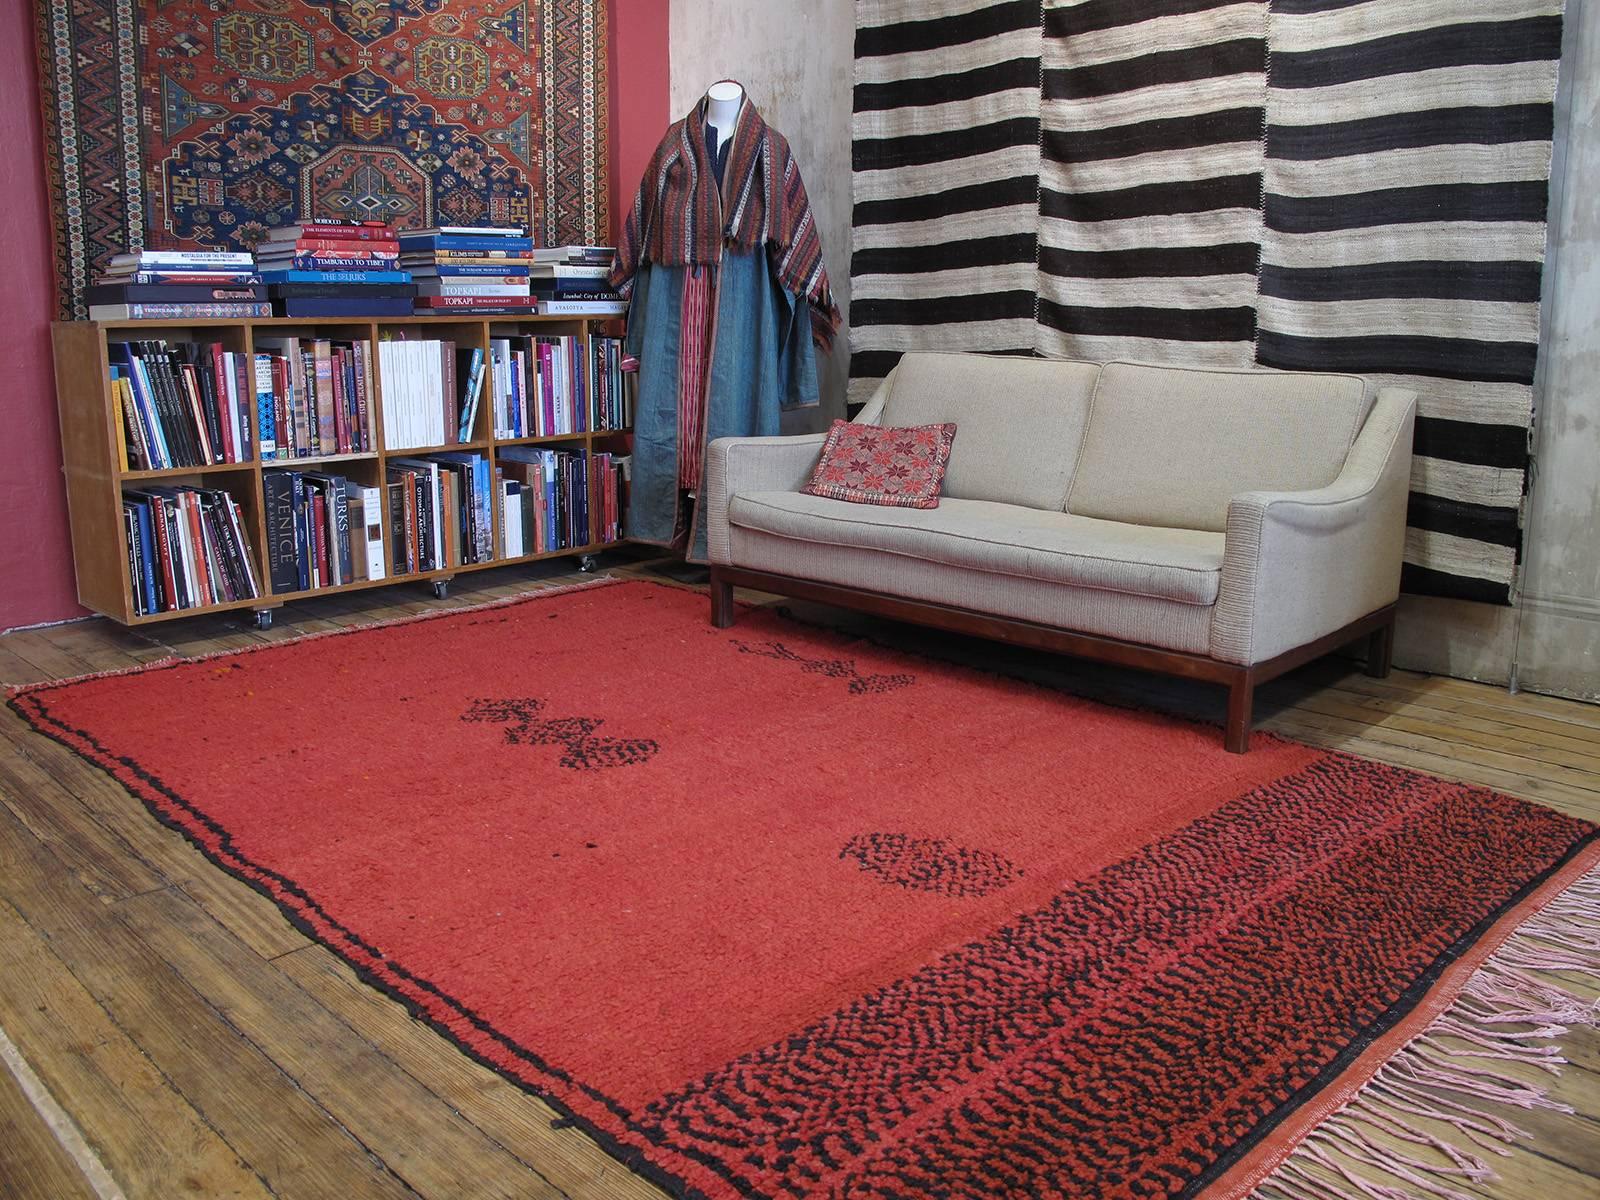 Boujad Moroccan rug. An old Berber rug from the vicinity of Boujad in Central Morocco, featuring a simple, whimsical design.